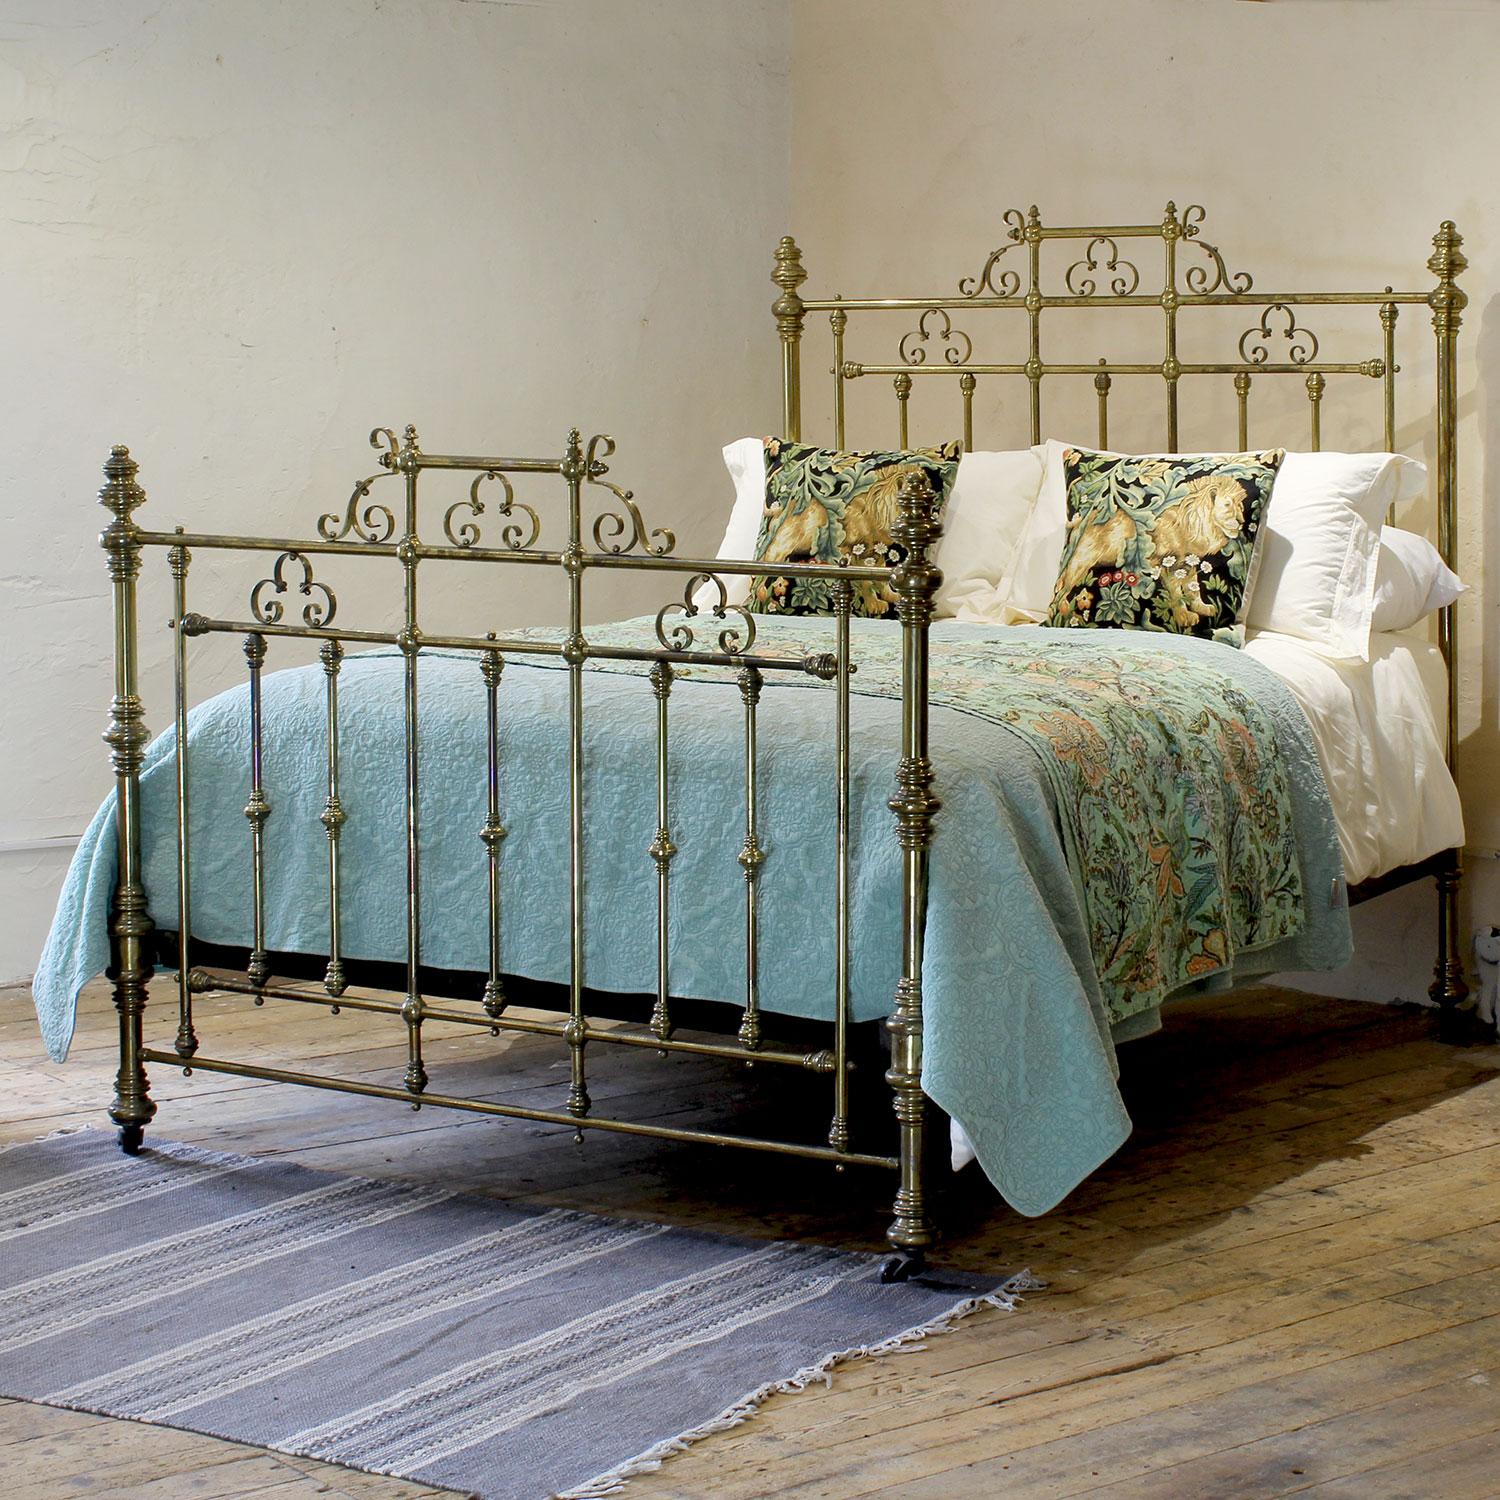 A magnificent top quality all brass Victorian antique bed with matching decorative gallery in head and foot panels, ornate brass knobs and scroll decoration.
This bed has the original patina of 150 years, but we can repolish and lacquer if required.